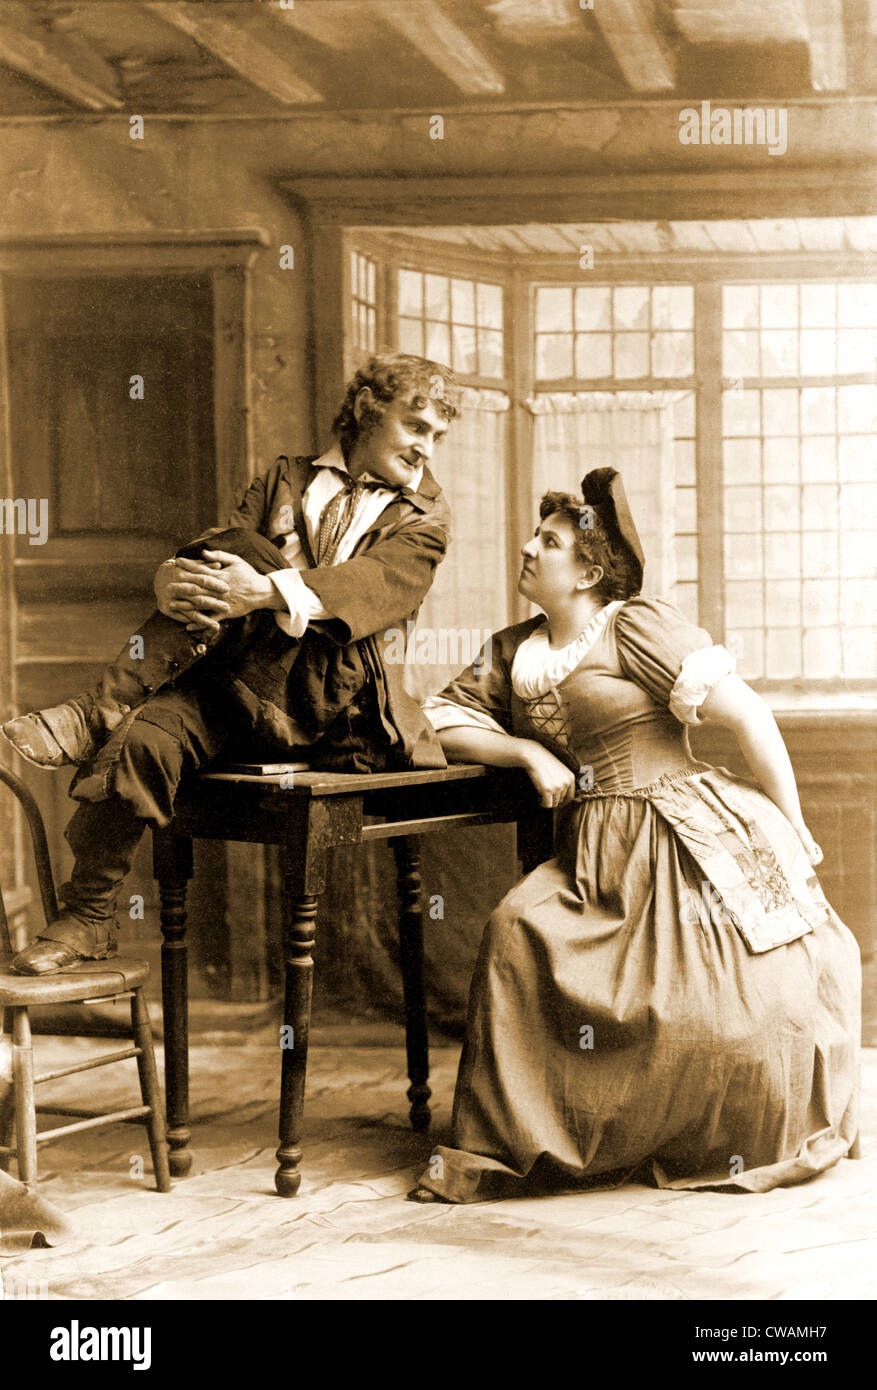 Joseph Jefferson (1829-1905), American actor, seated on table, looking at a woman before the sleep of 20 years. 1894. Stock Photo